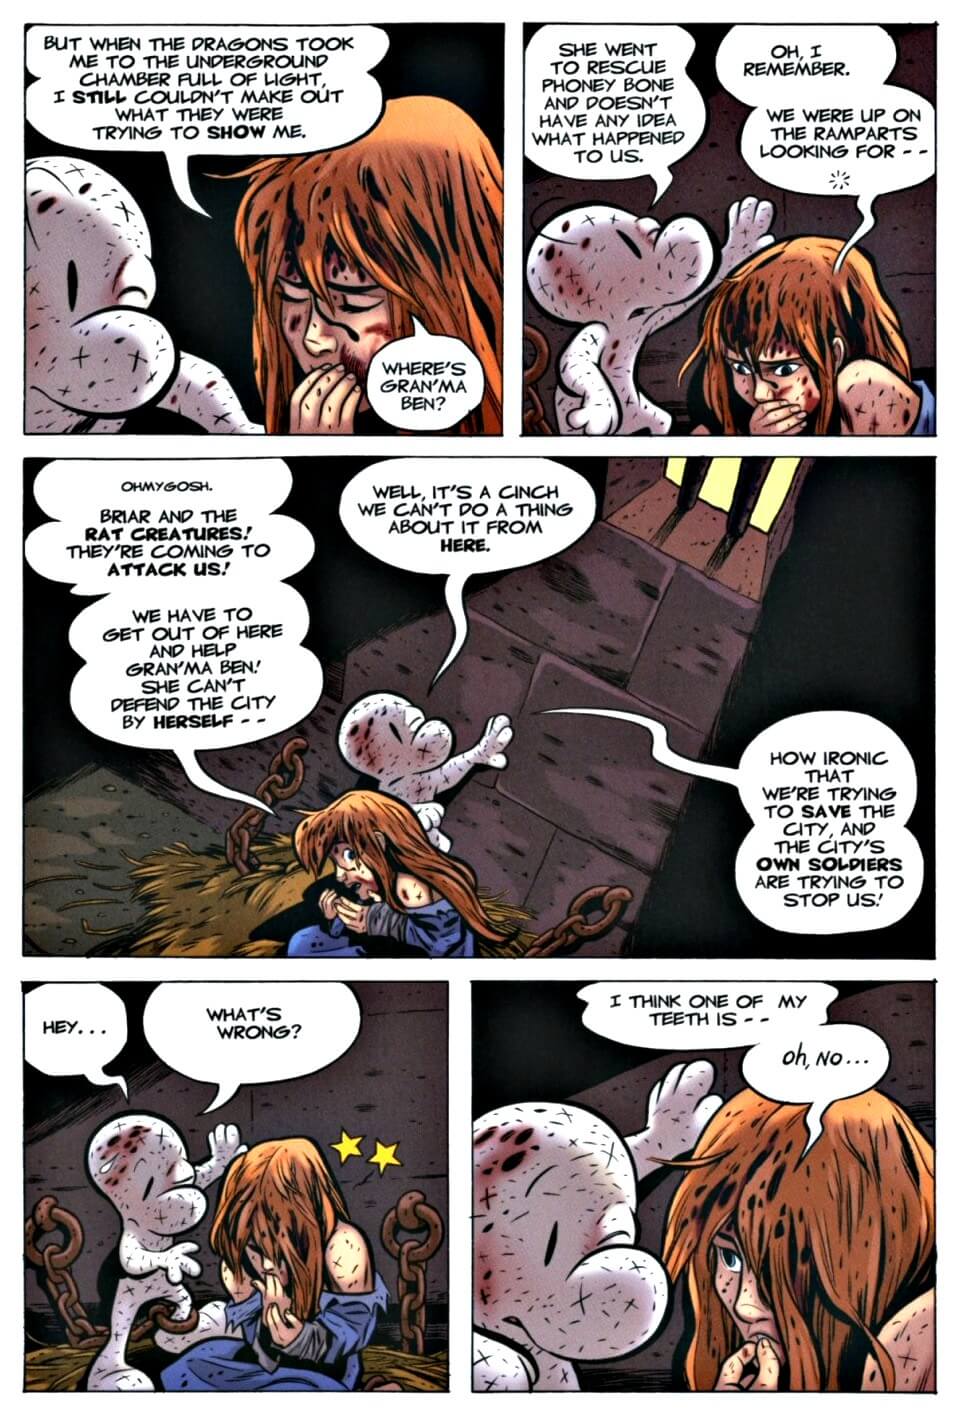 page 18 chapter 1 of bone 9 crown of horns graphic novel